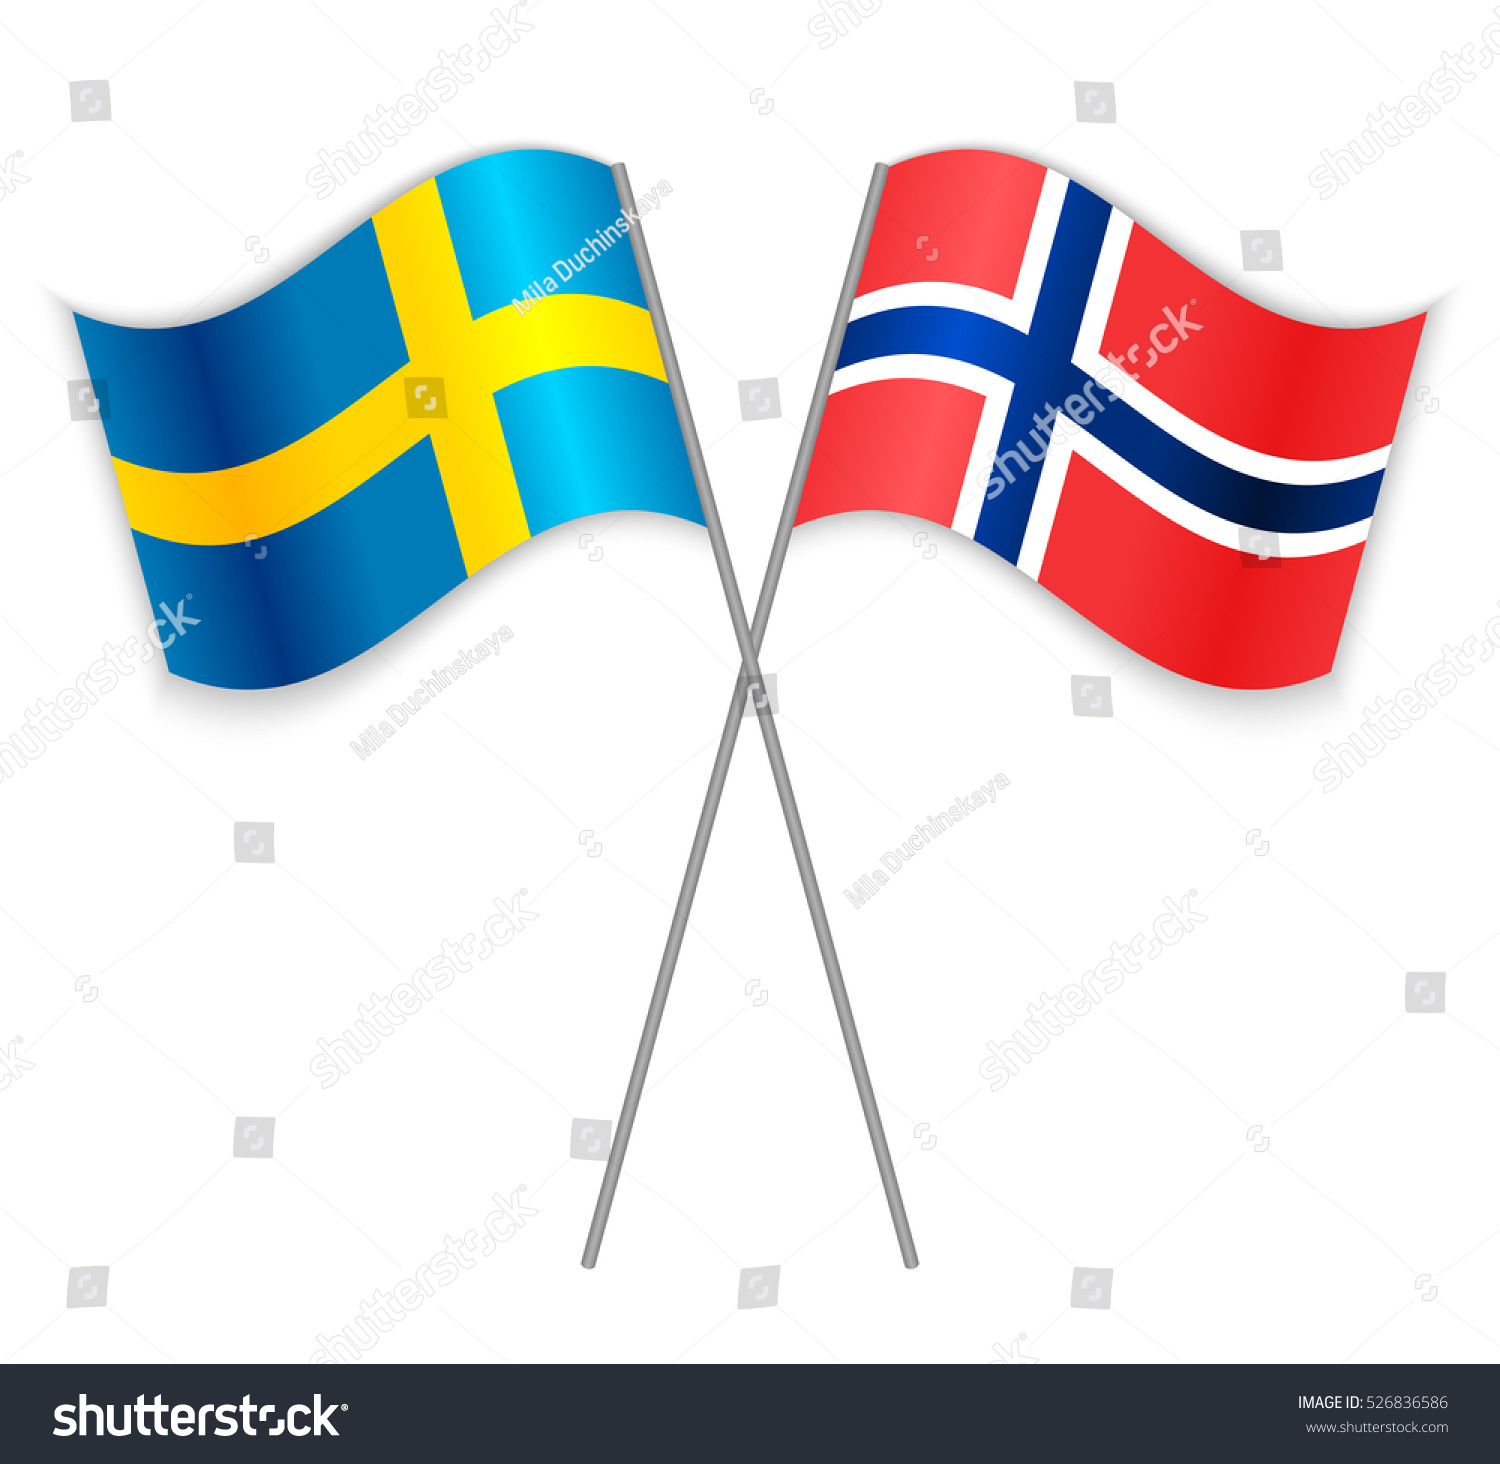 Swedish And Norwegian Crossed Flags Sweden Royalty Free Stock Vector 526836586